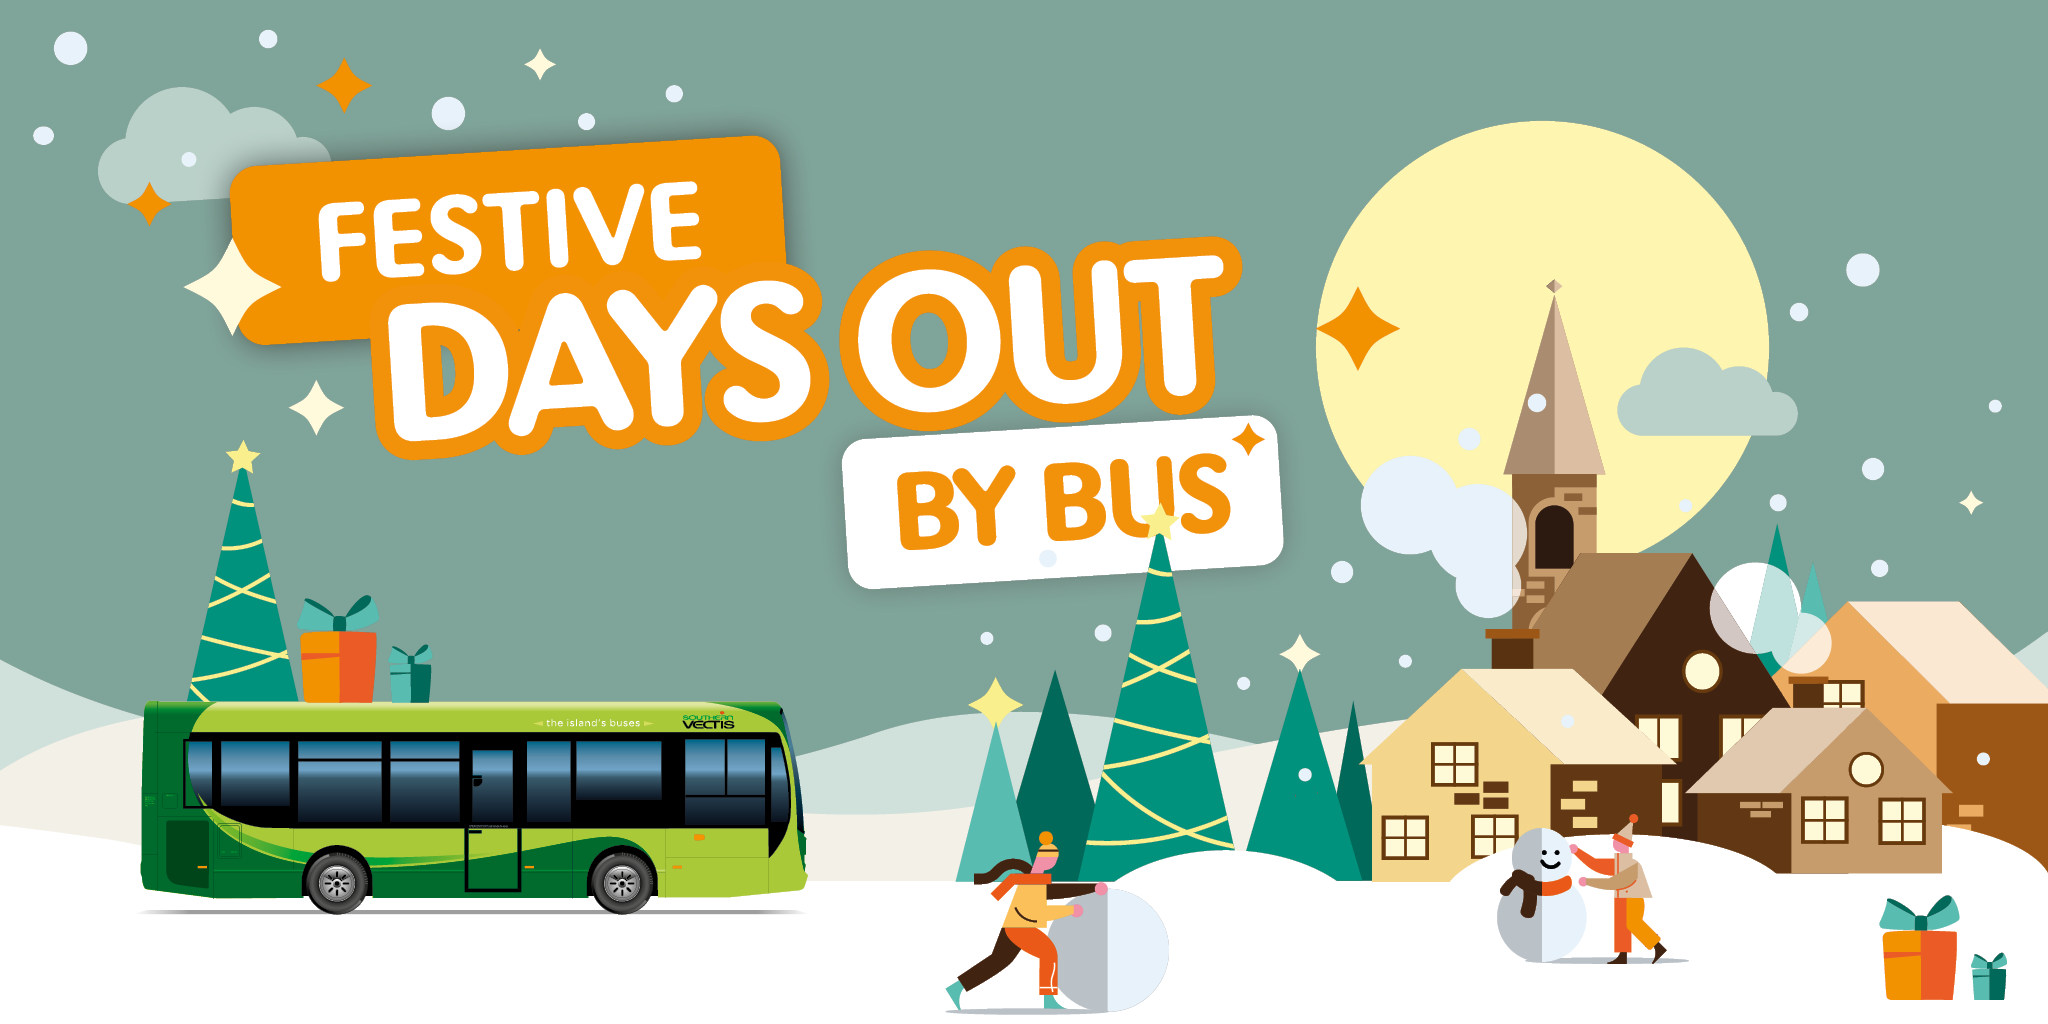 Festive Days Out By Bus